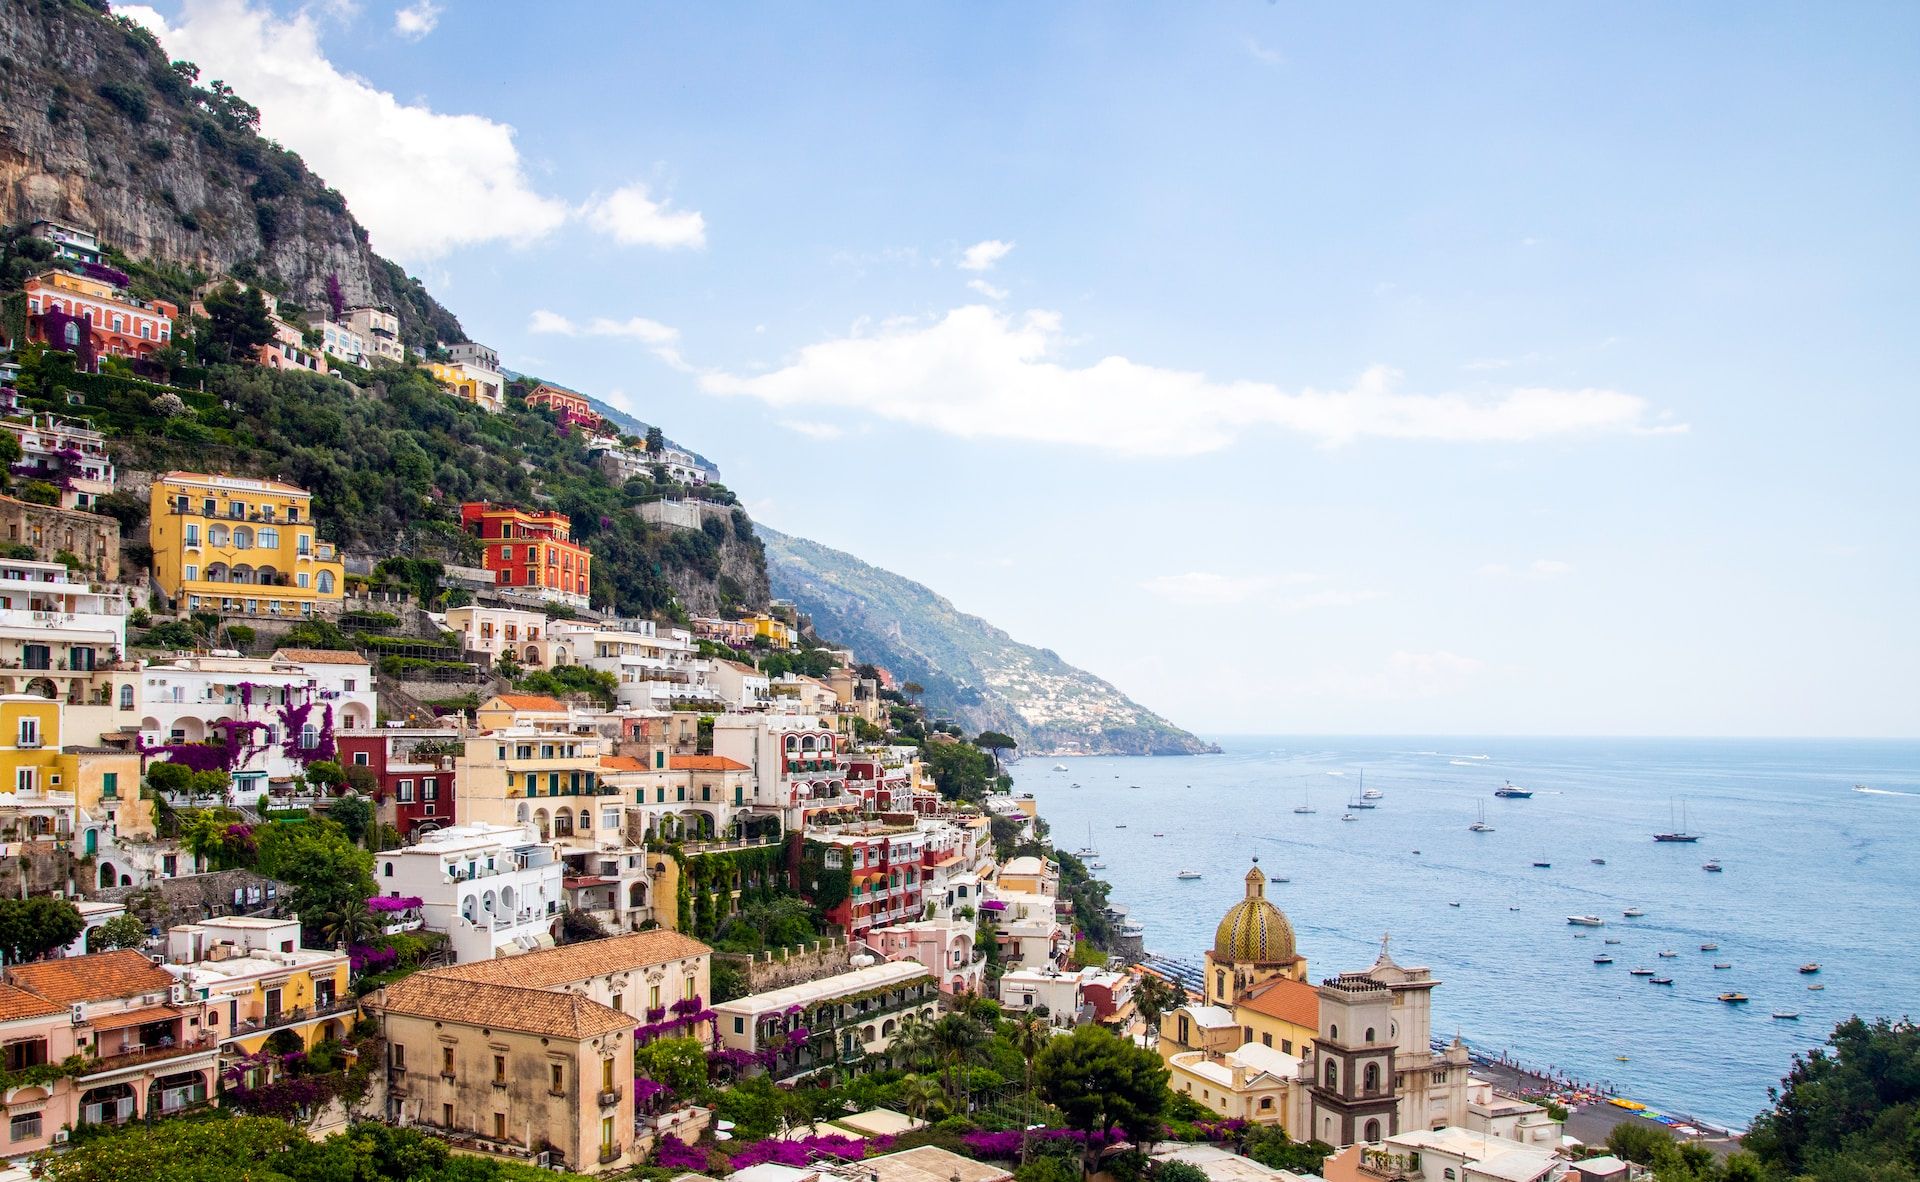 A beautiful view of Positano, with houses lined on a mountain, Italy